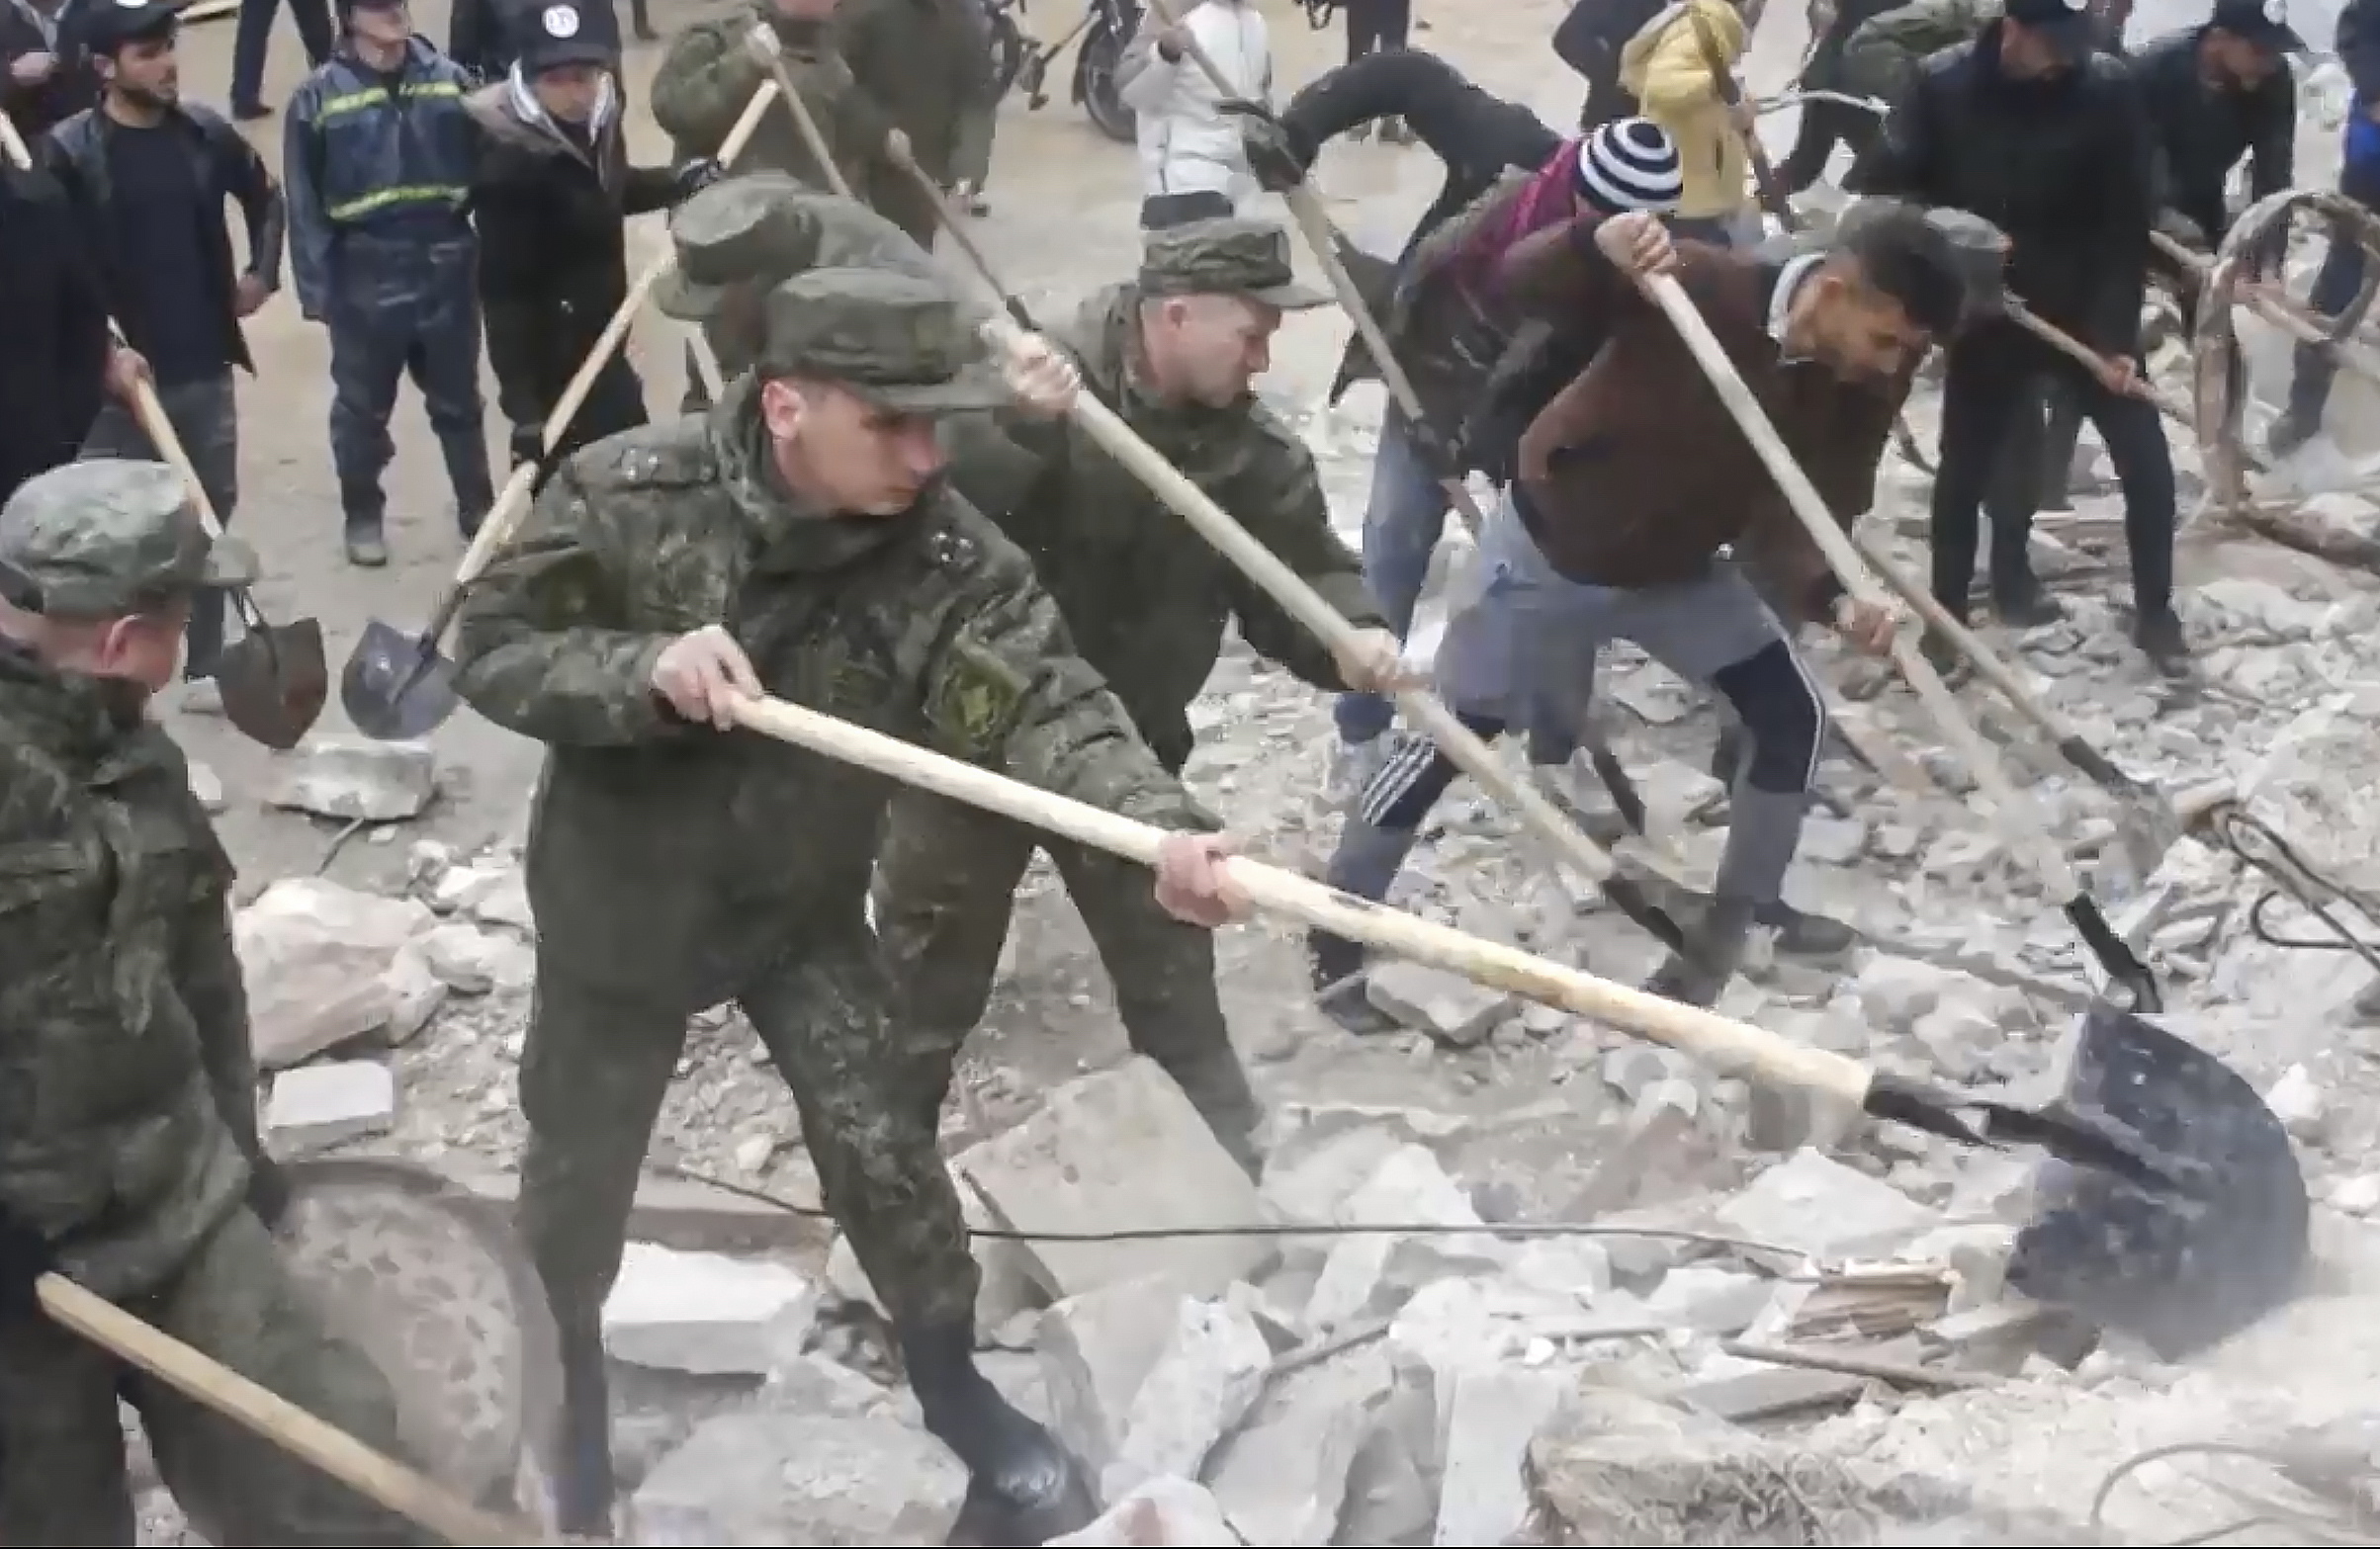 epa10452107 A still image taken from a handout video provided by the Russian Defence Ministry Press-Service on 07 February 2023 shows Russian servicemen searching for victims at the site of a collapsed building after a major earthquake in Latakia, Syria. More than 4,000 people were killed and thousands more injured after a major 7.8 magnitude earthquake struck southern Turkey and northern Syria on 06 February. Authorities fear the death toll will keep climbing as rescuers look for survivors across the region.  EPA/RUSSIAN DEFENCE MINISTRY PRESS SERVICE HANDOUT -- BEST QUALITY AVAILABLE -- MANDATORY CREDIT -- HANDOUT EDITORIAL USE ONLY/NO SALES